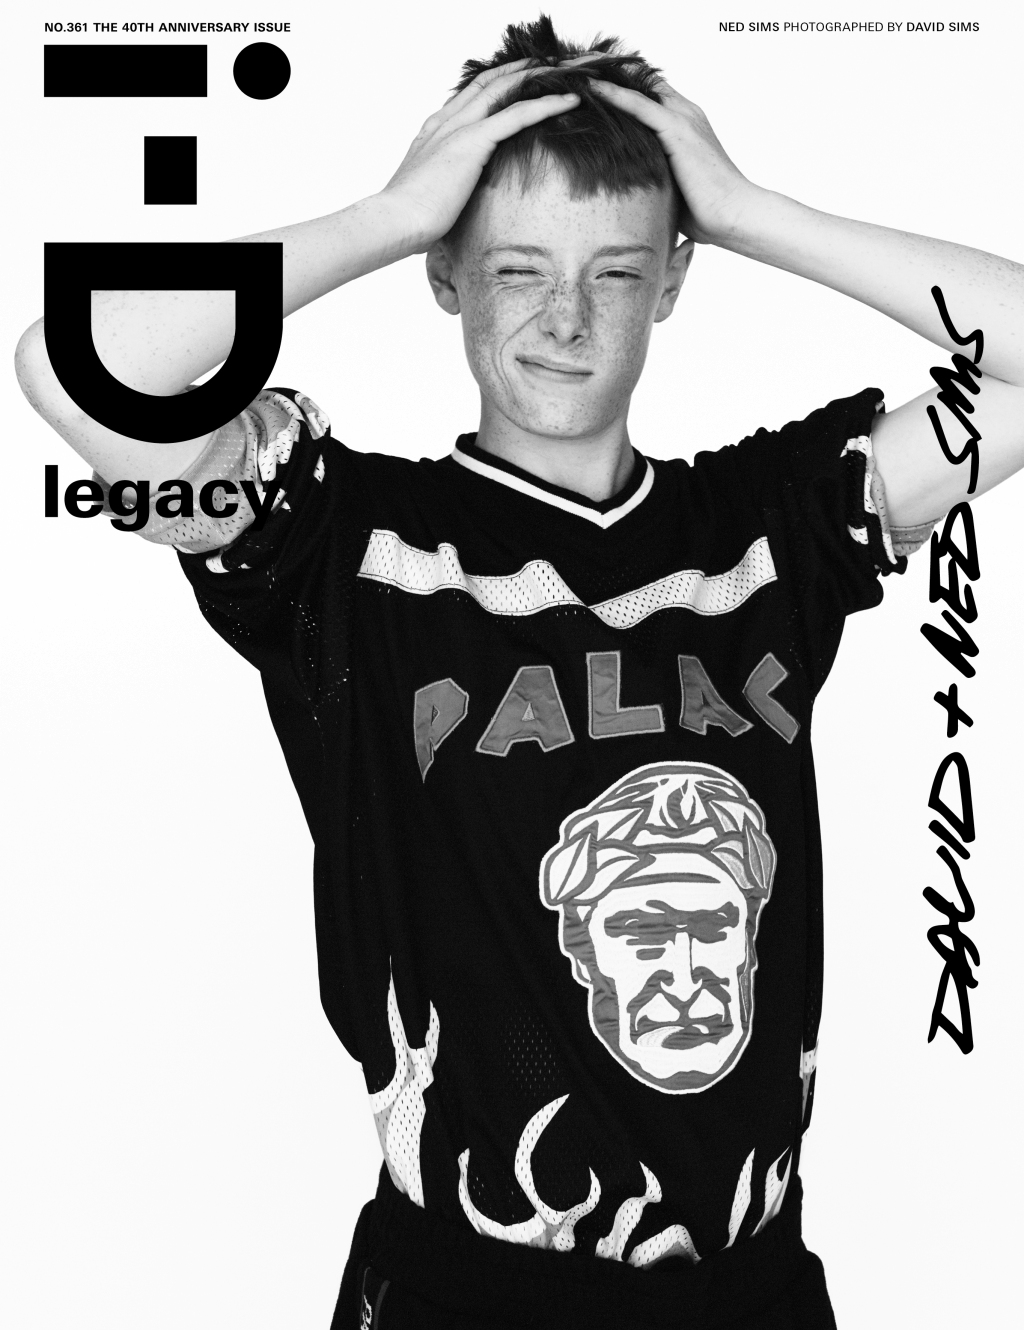 Ned Sims wearing Palace photographed by his father ​David Sims​ for the i-D magazine 40th anniversary issue.